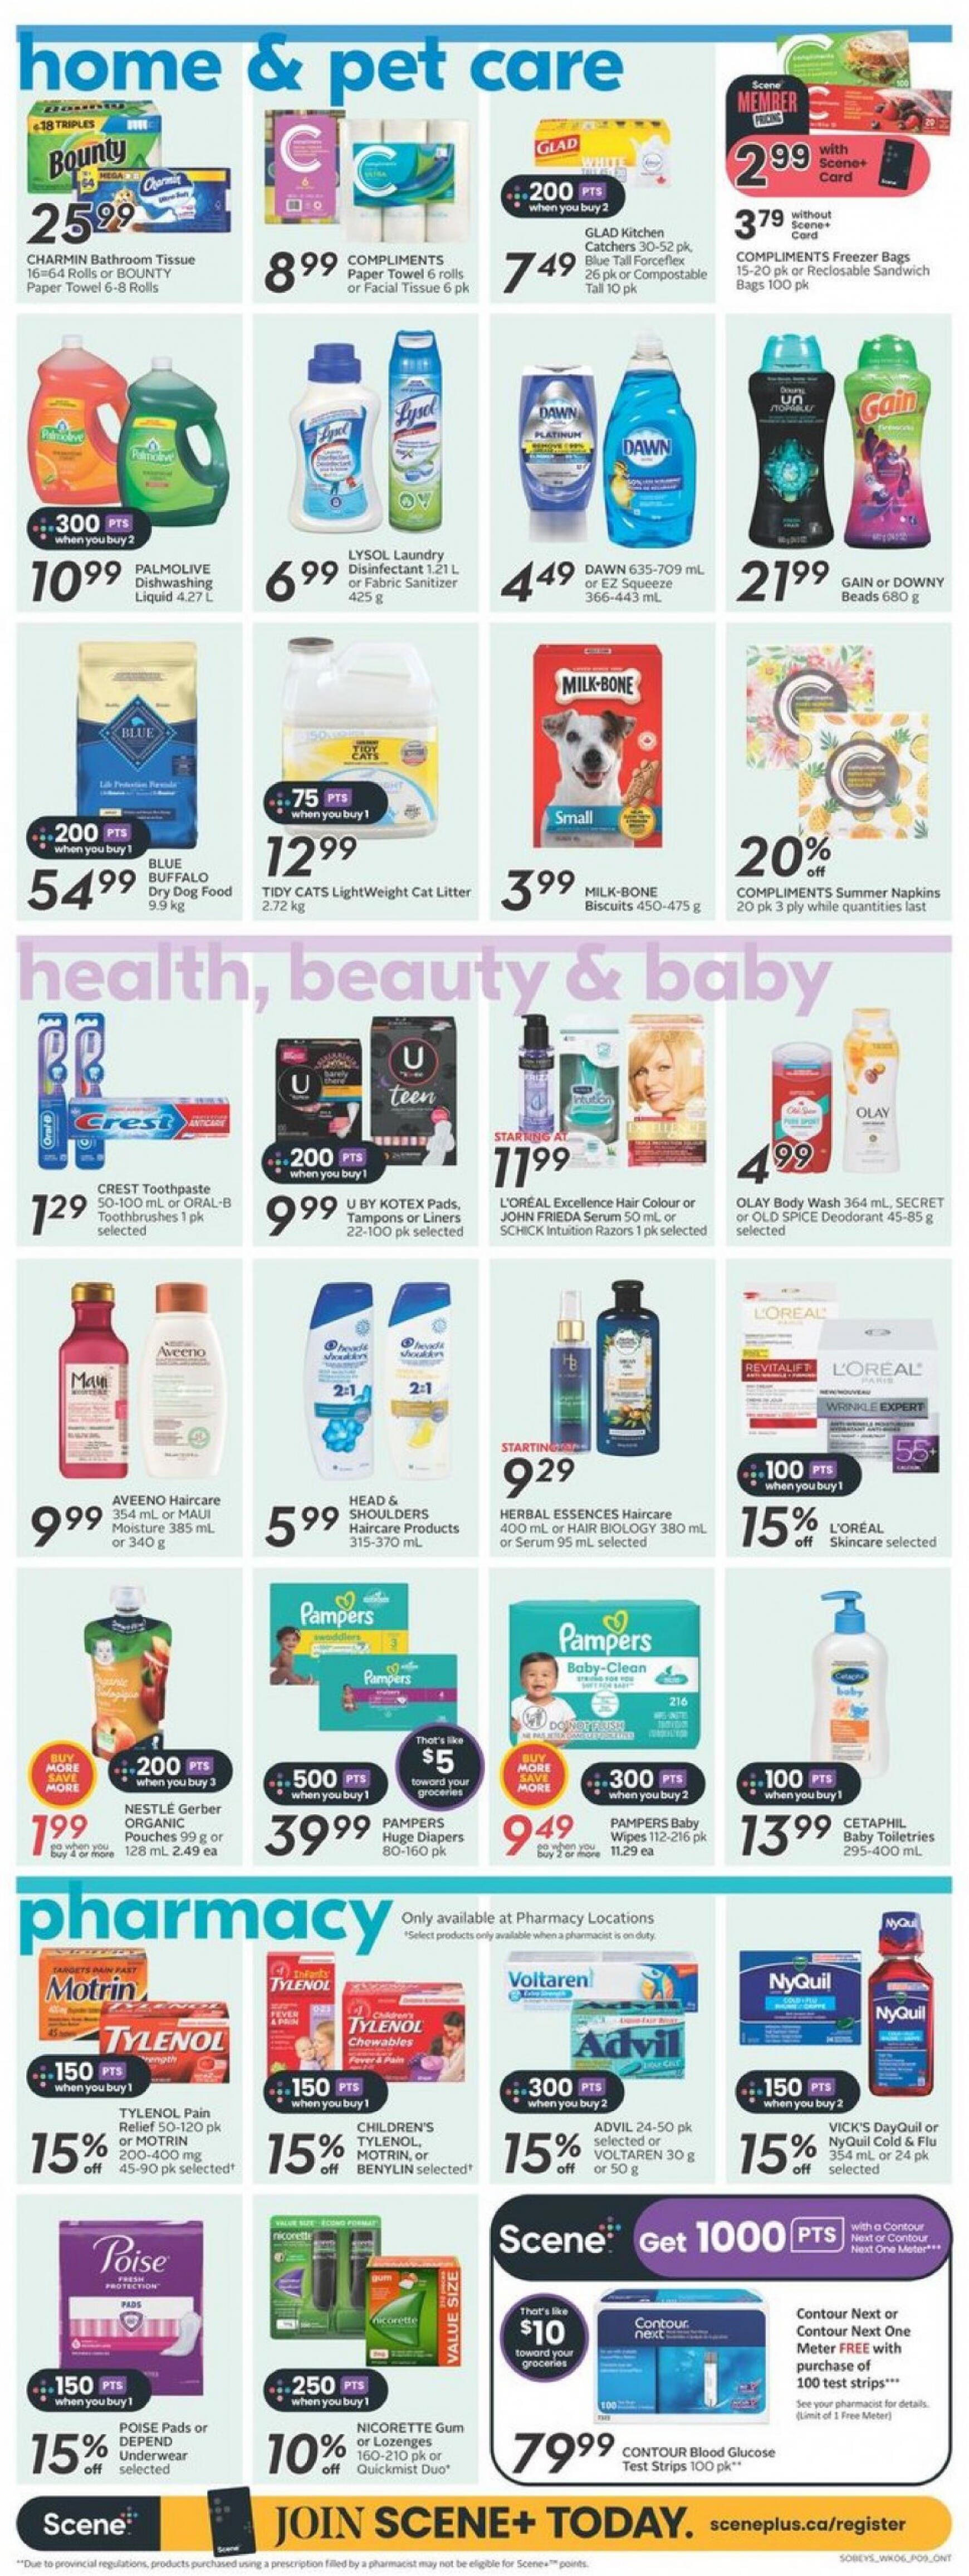 sobeys - Sobeys - Weekly Flyer - Ontario flyer current 06.06. - 12.06. - page: 17